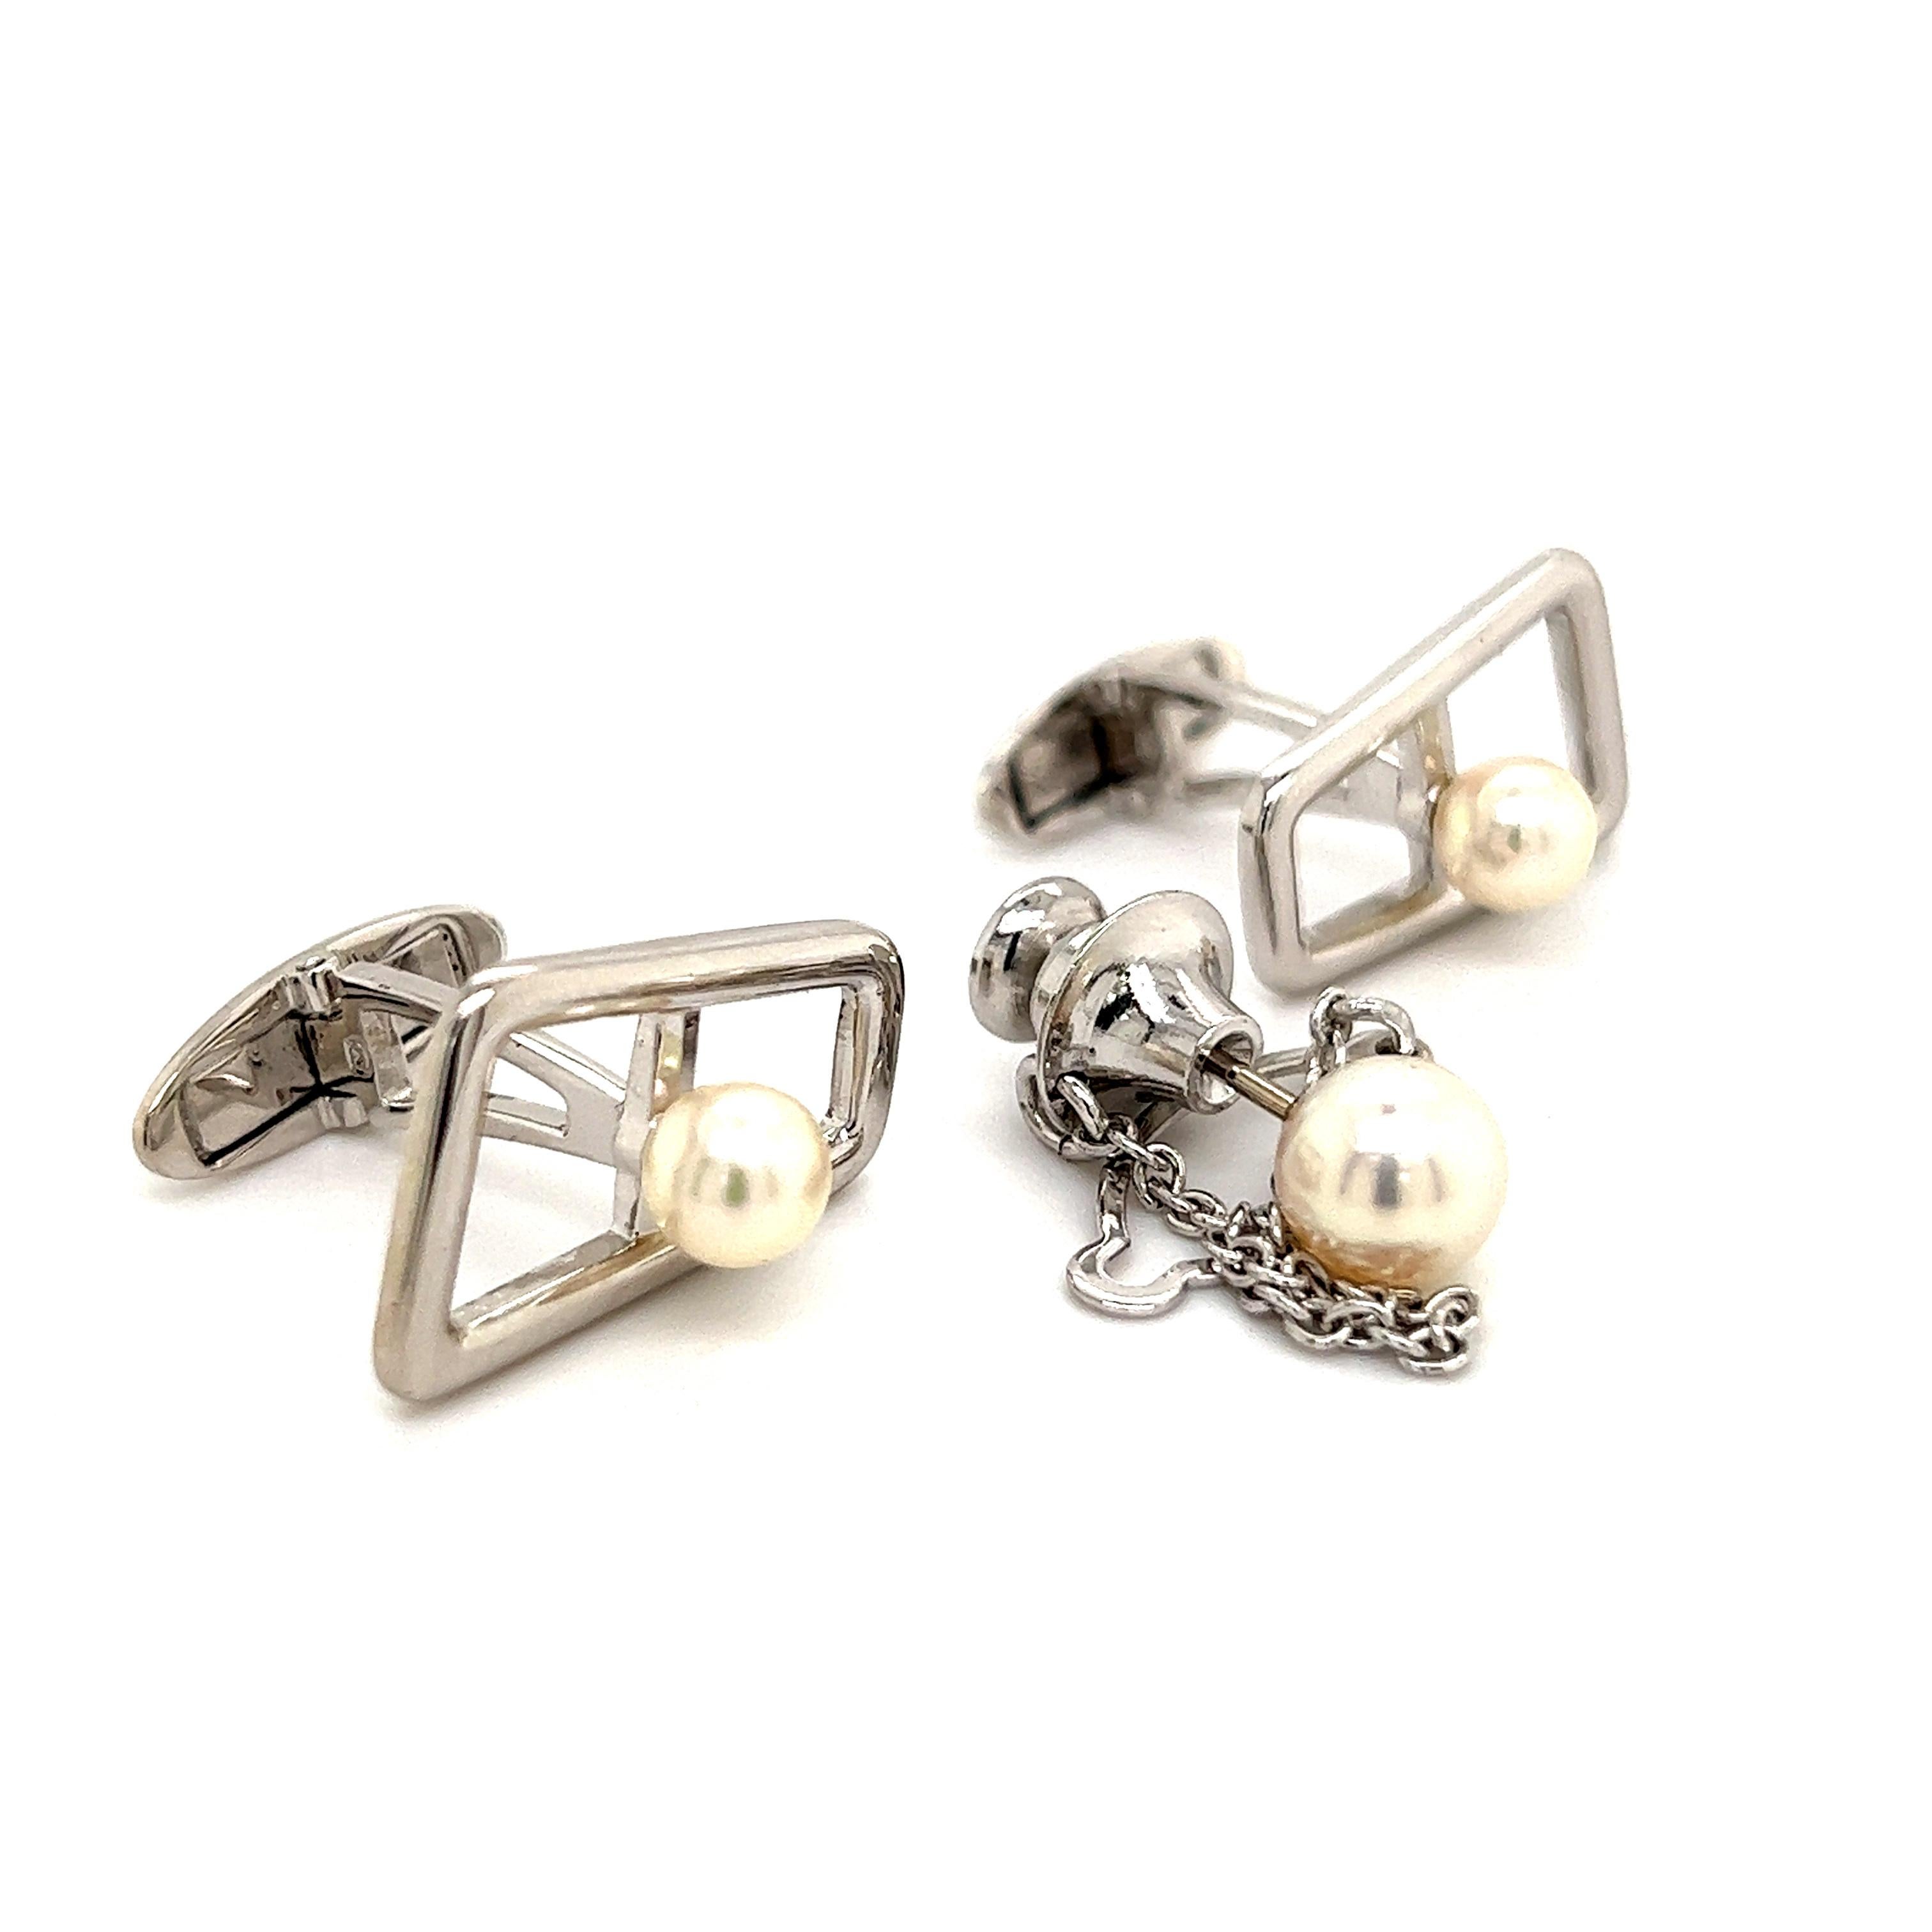 Mikimoto Estate Akoya Pearl Cufflinks and Tie Pin Sterling Silver In Good Condition For Sale In Brooklyn, NY